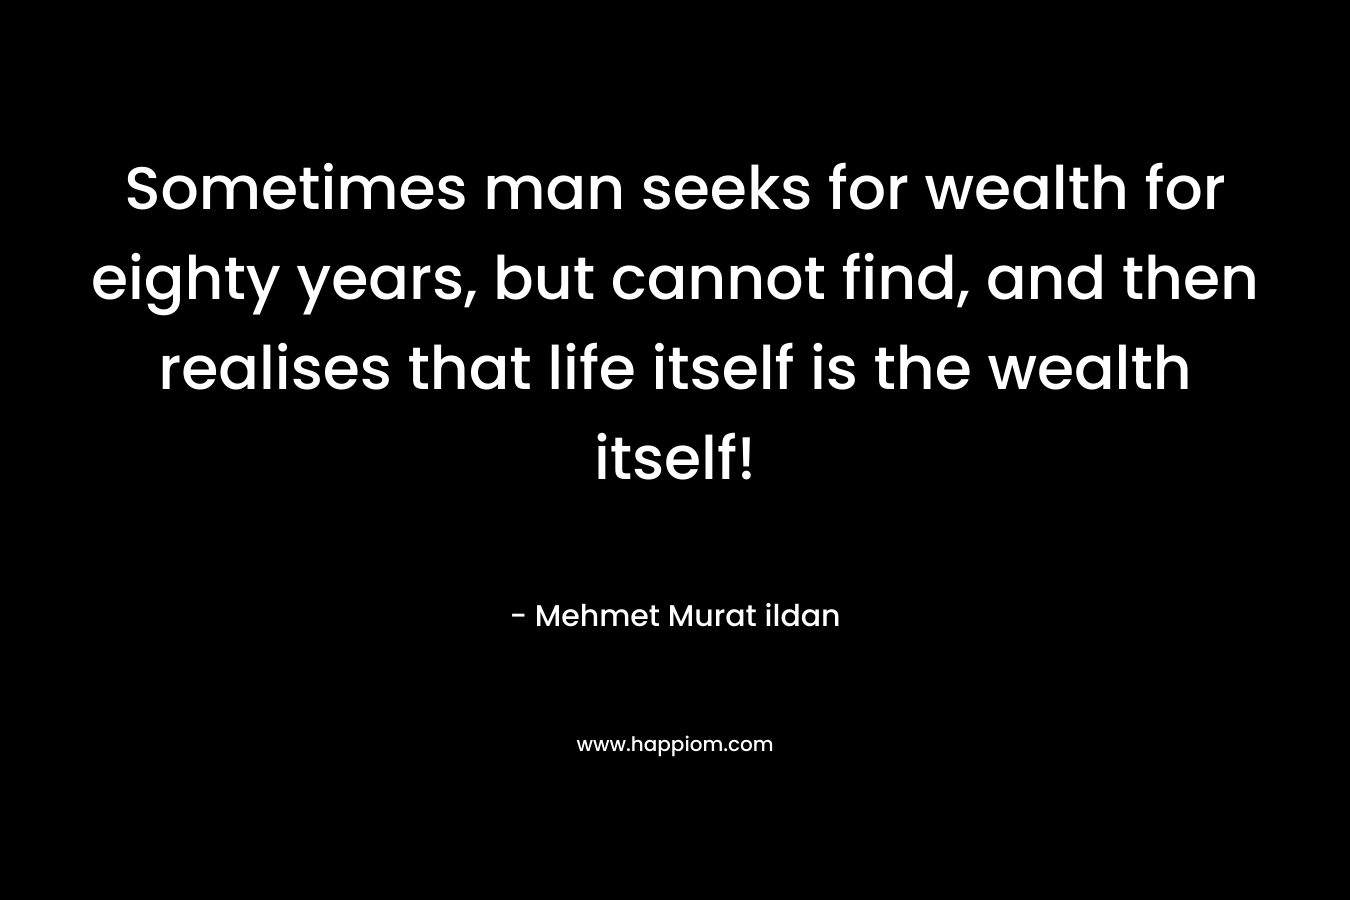 Sometimes man seeks for wealth for eighty years, but cannot find, and then realises that life itself is the wealth itself! – Mehmet Murat ildan